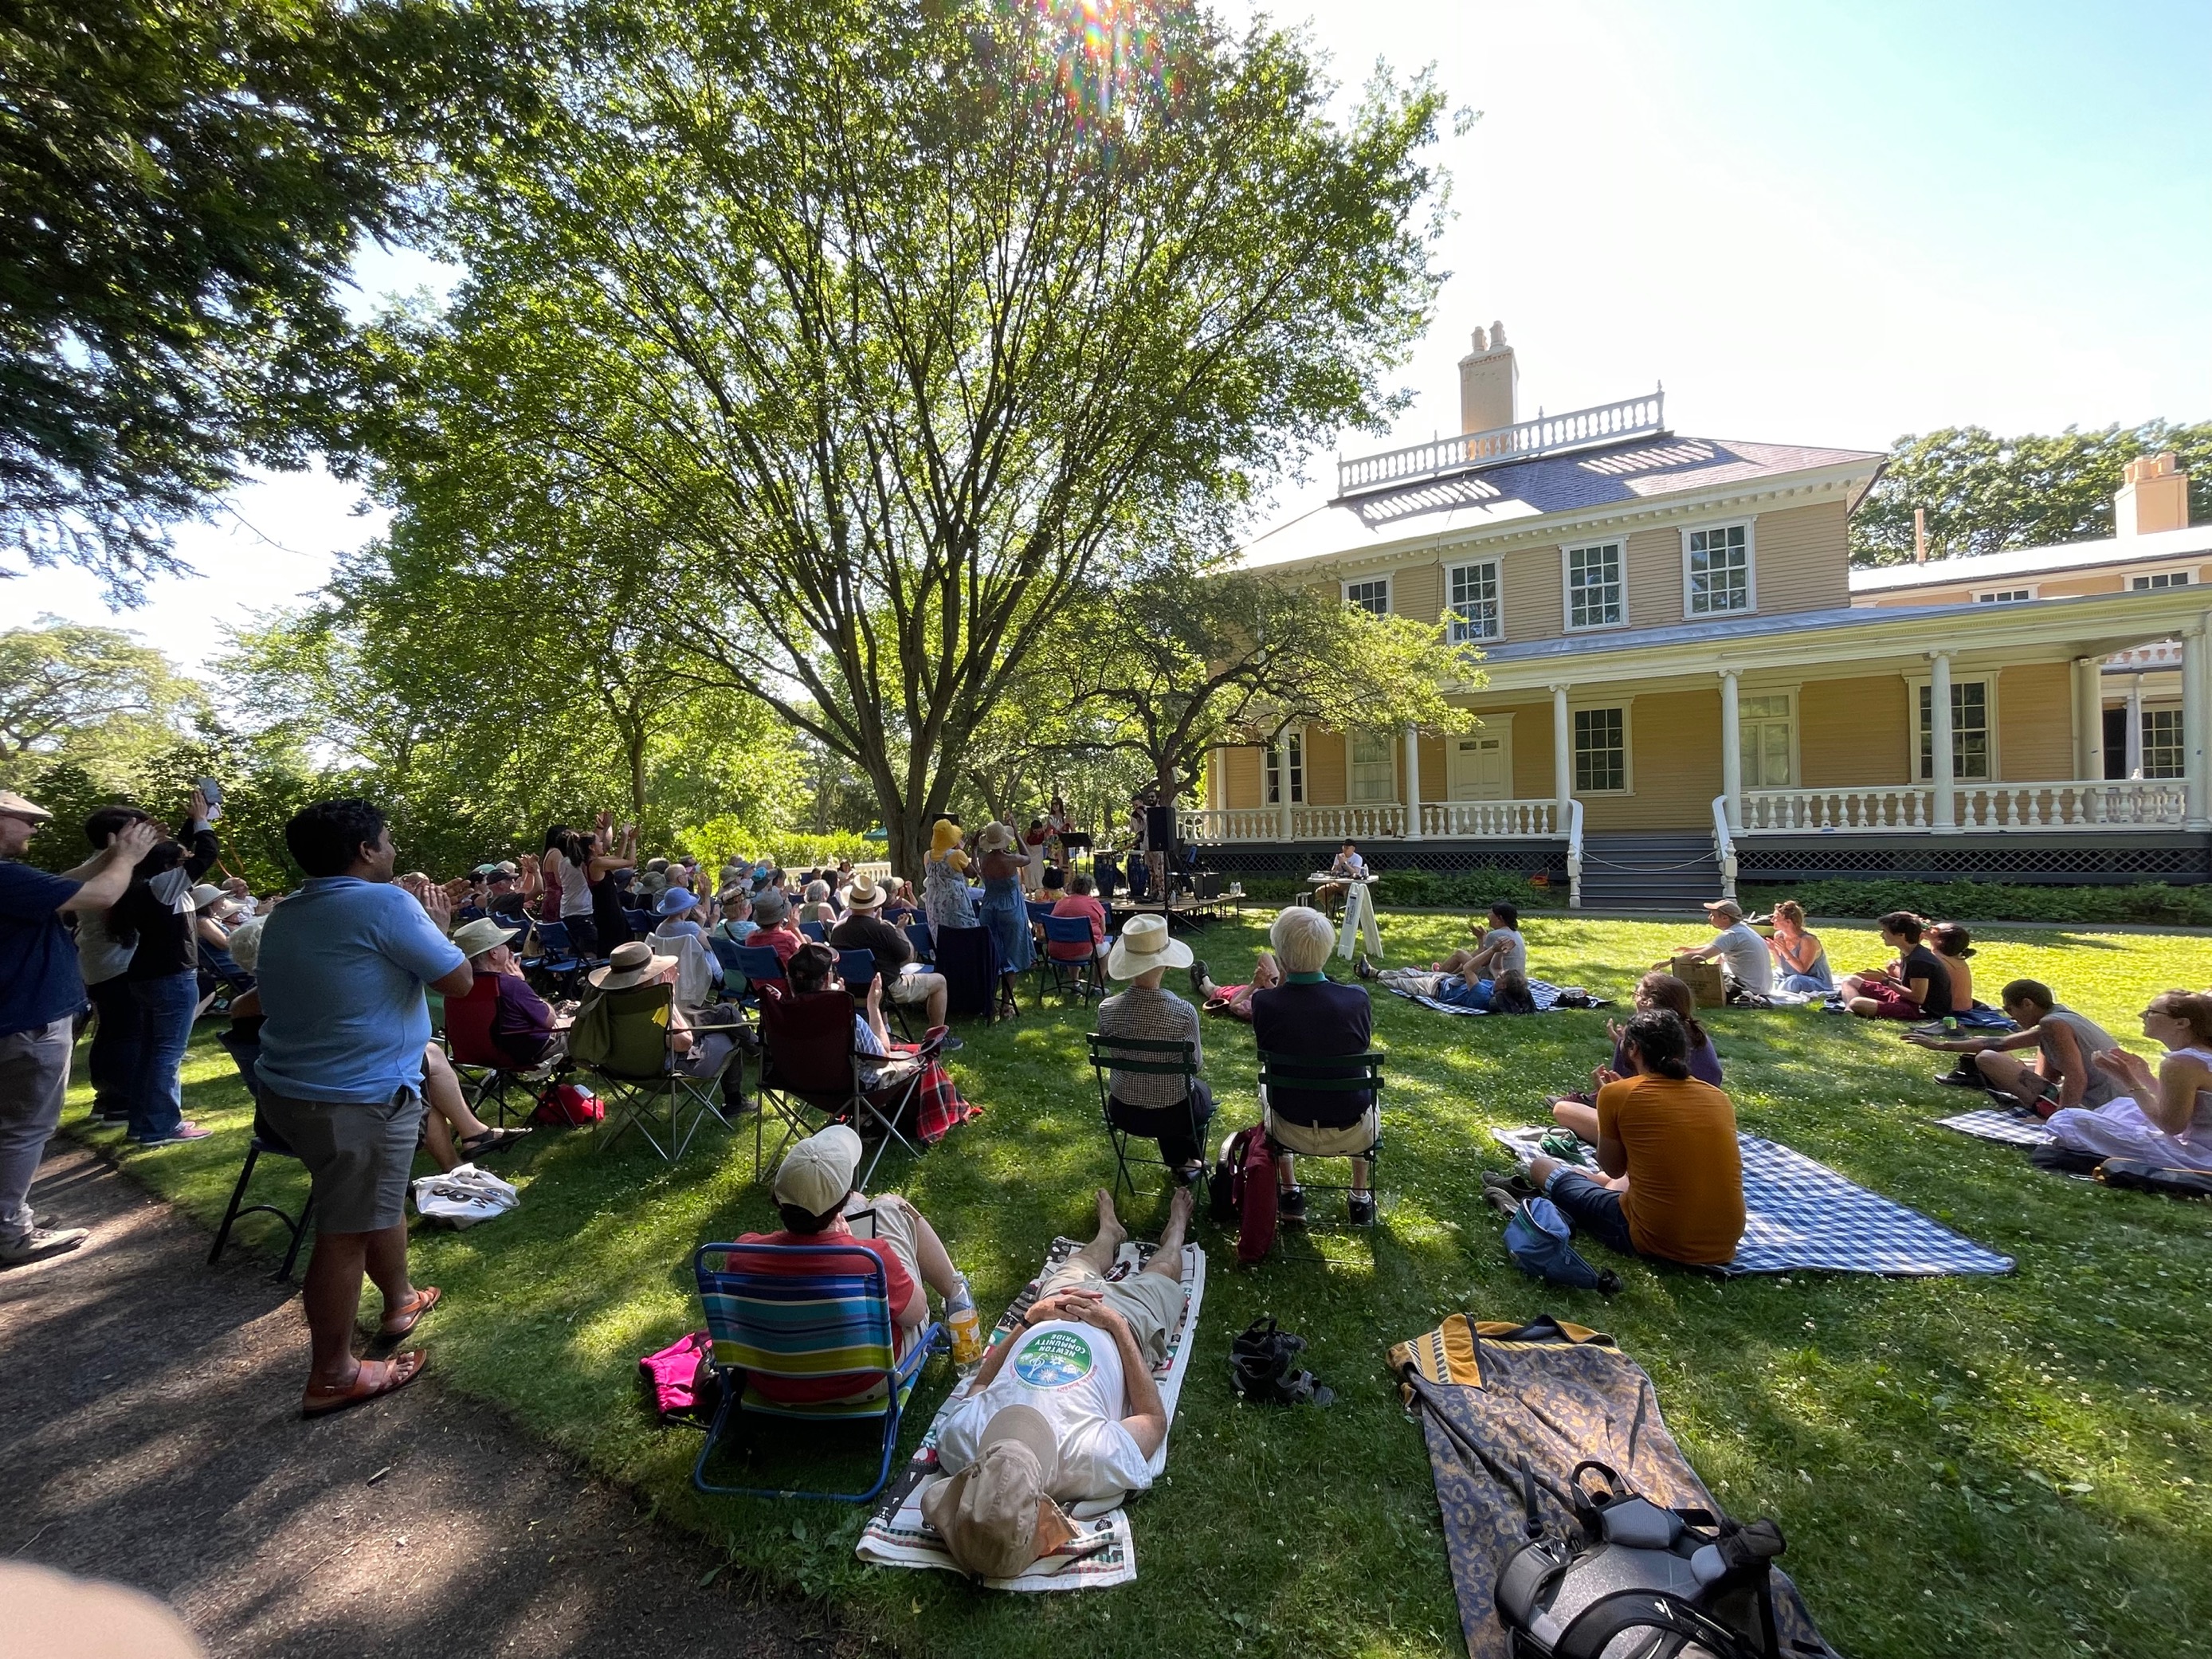 Crowd on a shaded lawn listens to and applauds musicians